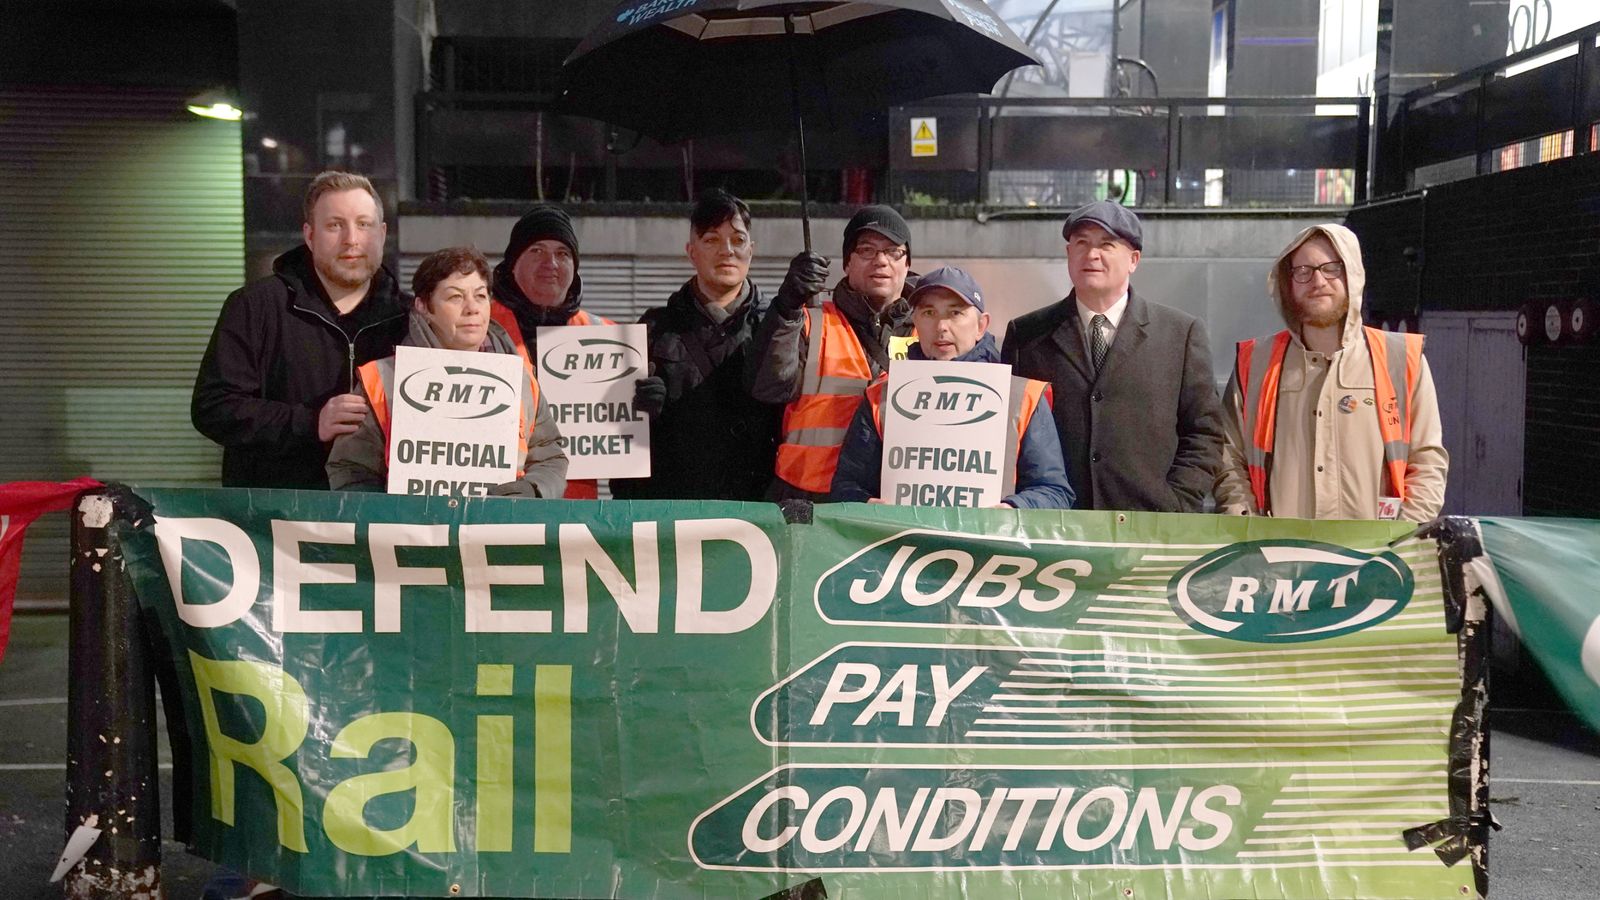 RMT union rejects latest 'dreadful' pay offers as Mick Lynch vows strikes will continue for 'as long as it takes'